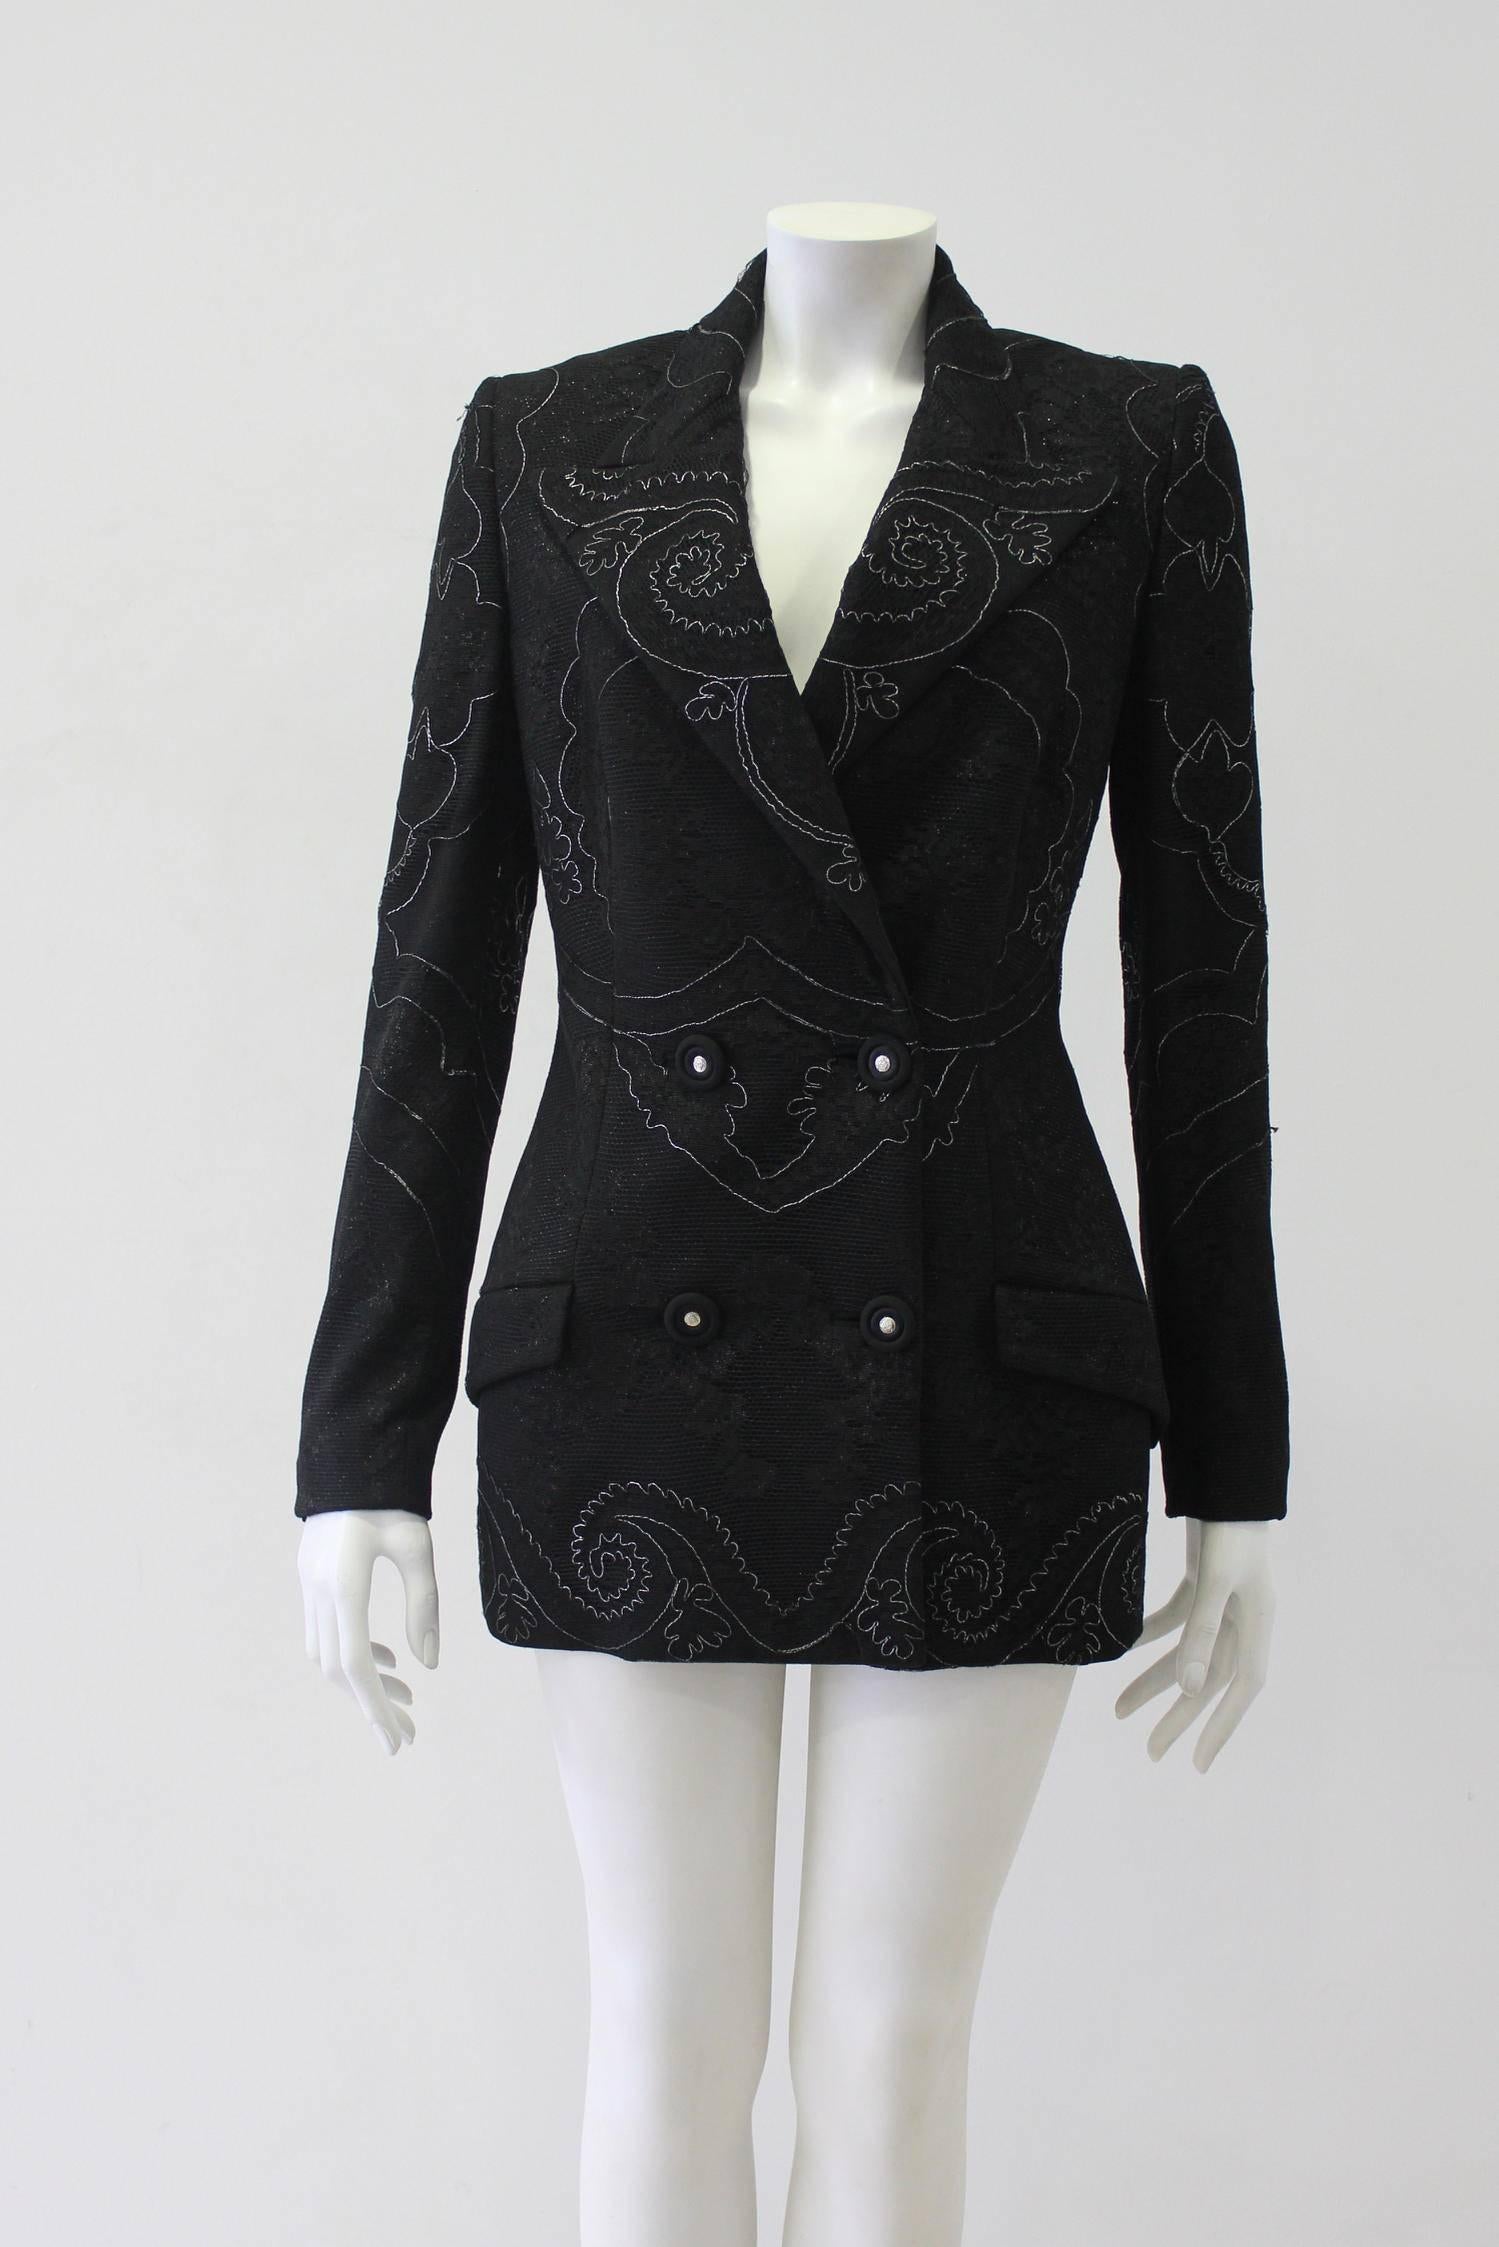 Rare Gianni Versace Couture Lace Metallic Embroidered Jacket Fall 1996